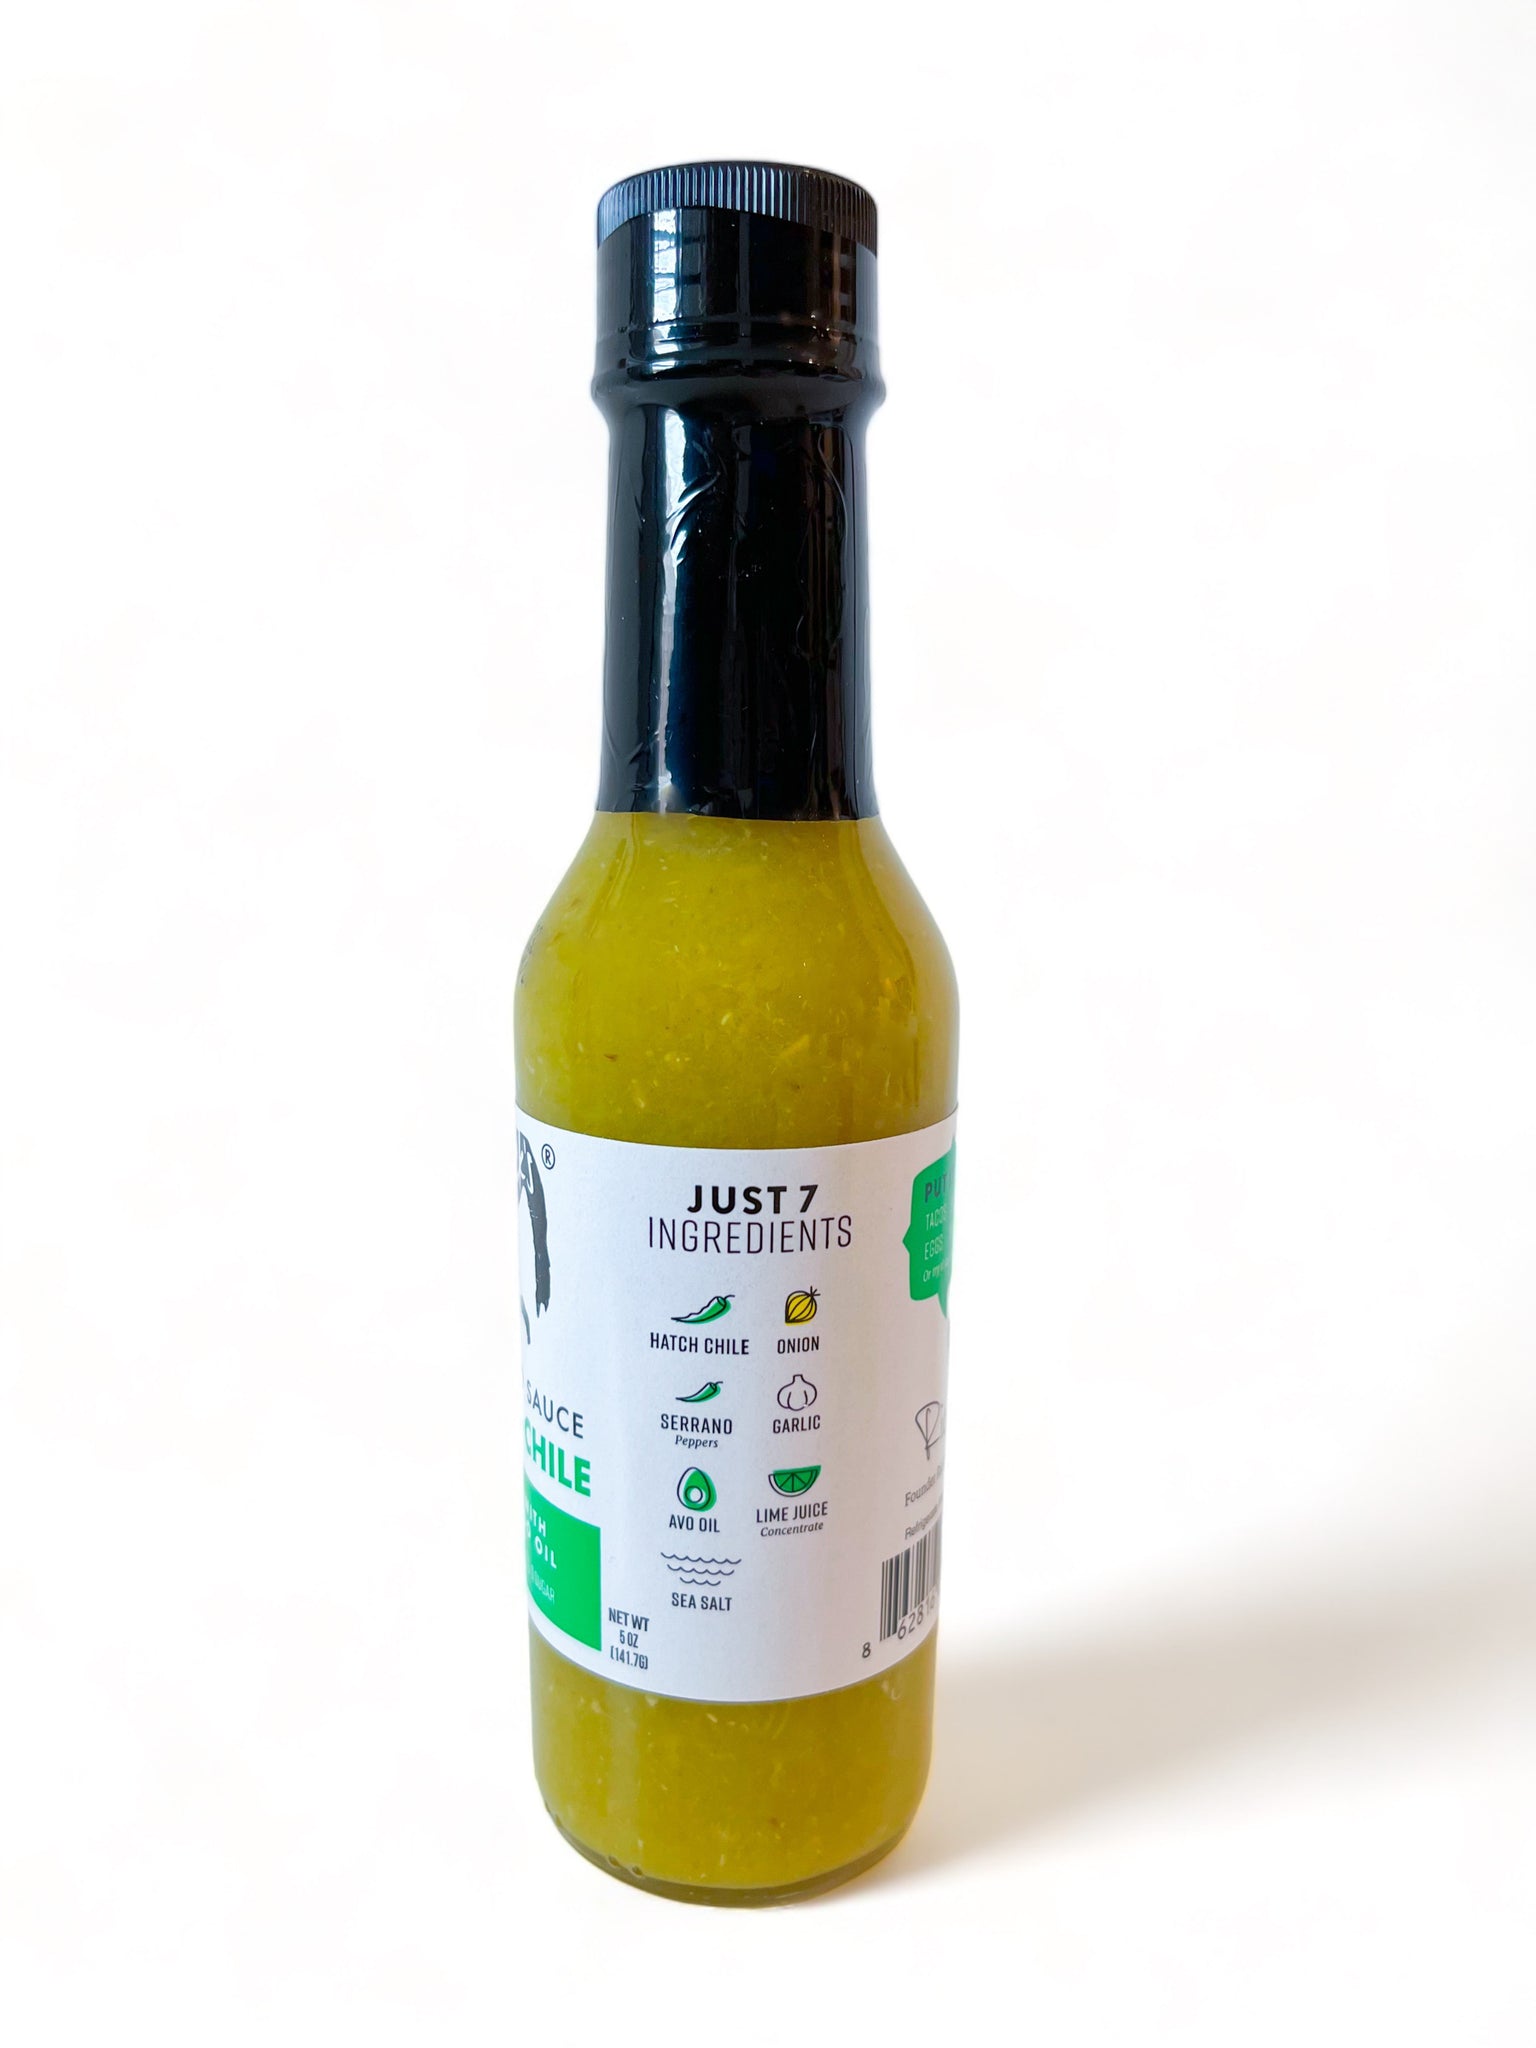 3 Pack- Rick's Hatch Green Chile Avocado Sauce